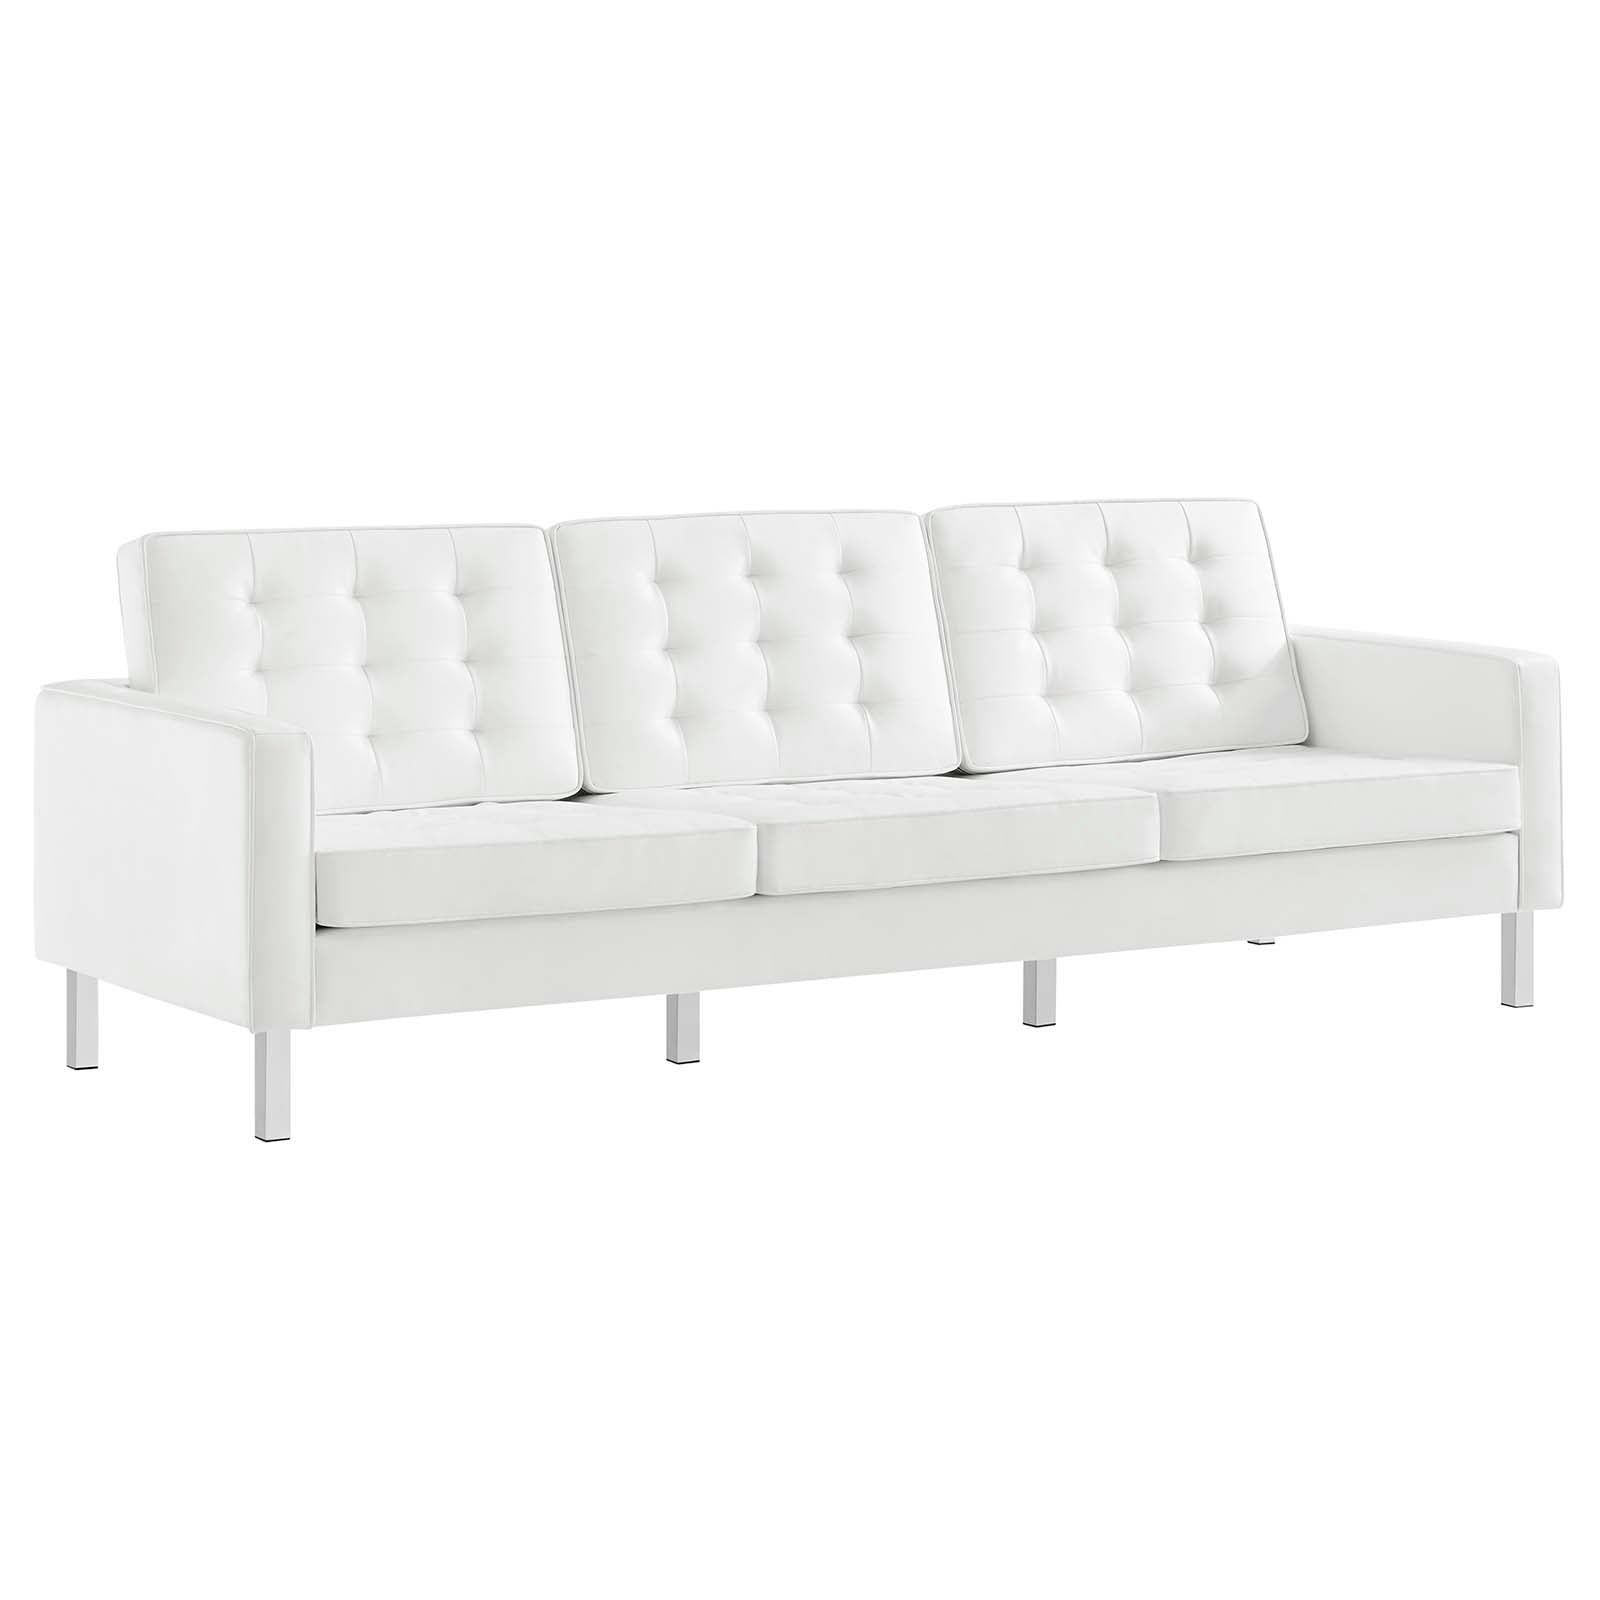 Modway Living Room Sets - Loft Tufted Upholstered Faux Leather Sofa and Loveseat Set Silver White